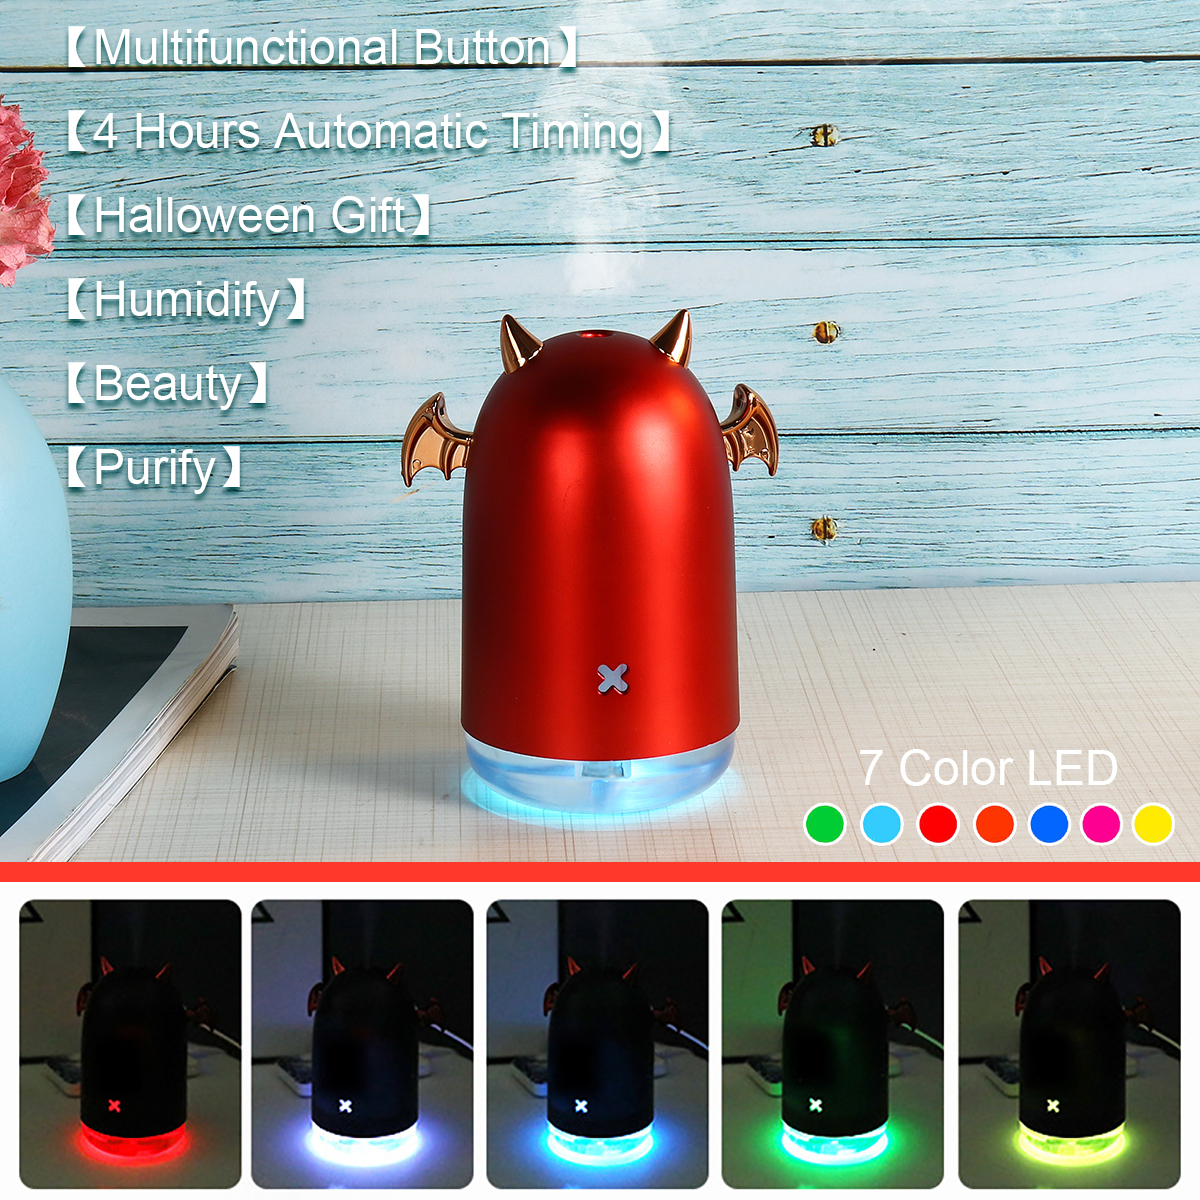 7-LED-Humidifier-USB-Purifier-Mist-Aroma-Essential-Oil-Diffuser-Halloween-Gift-1651094-1